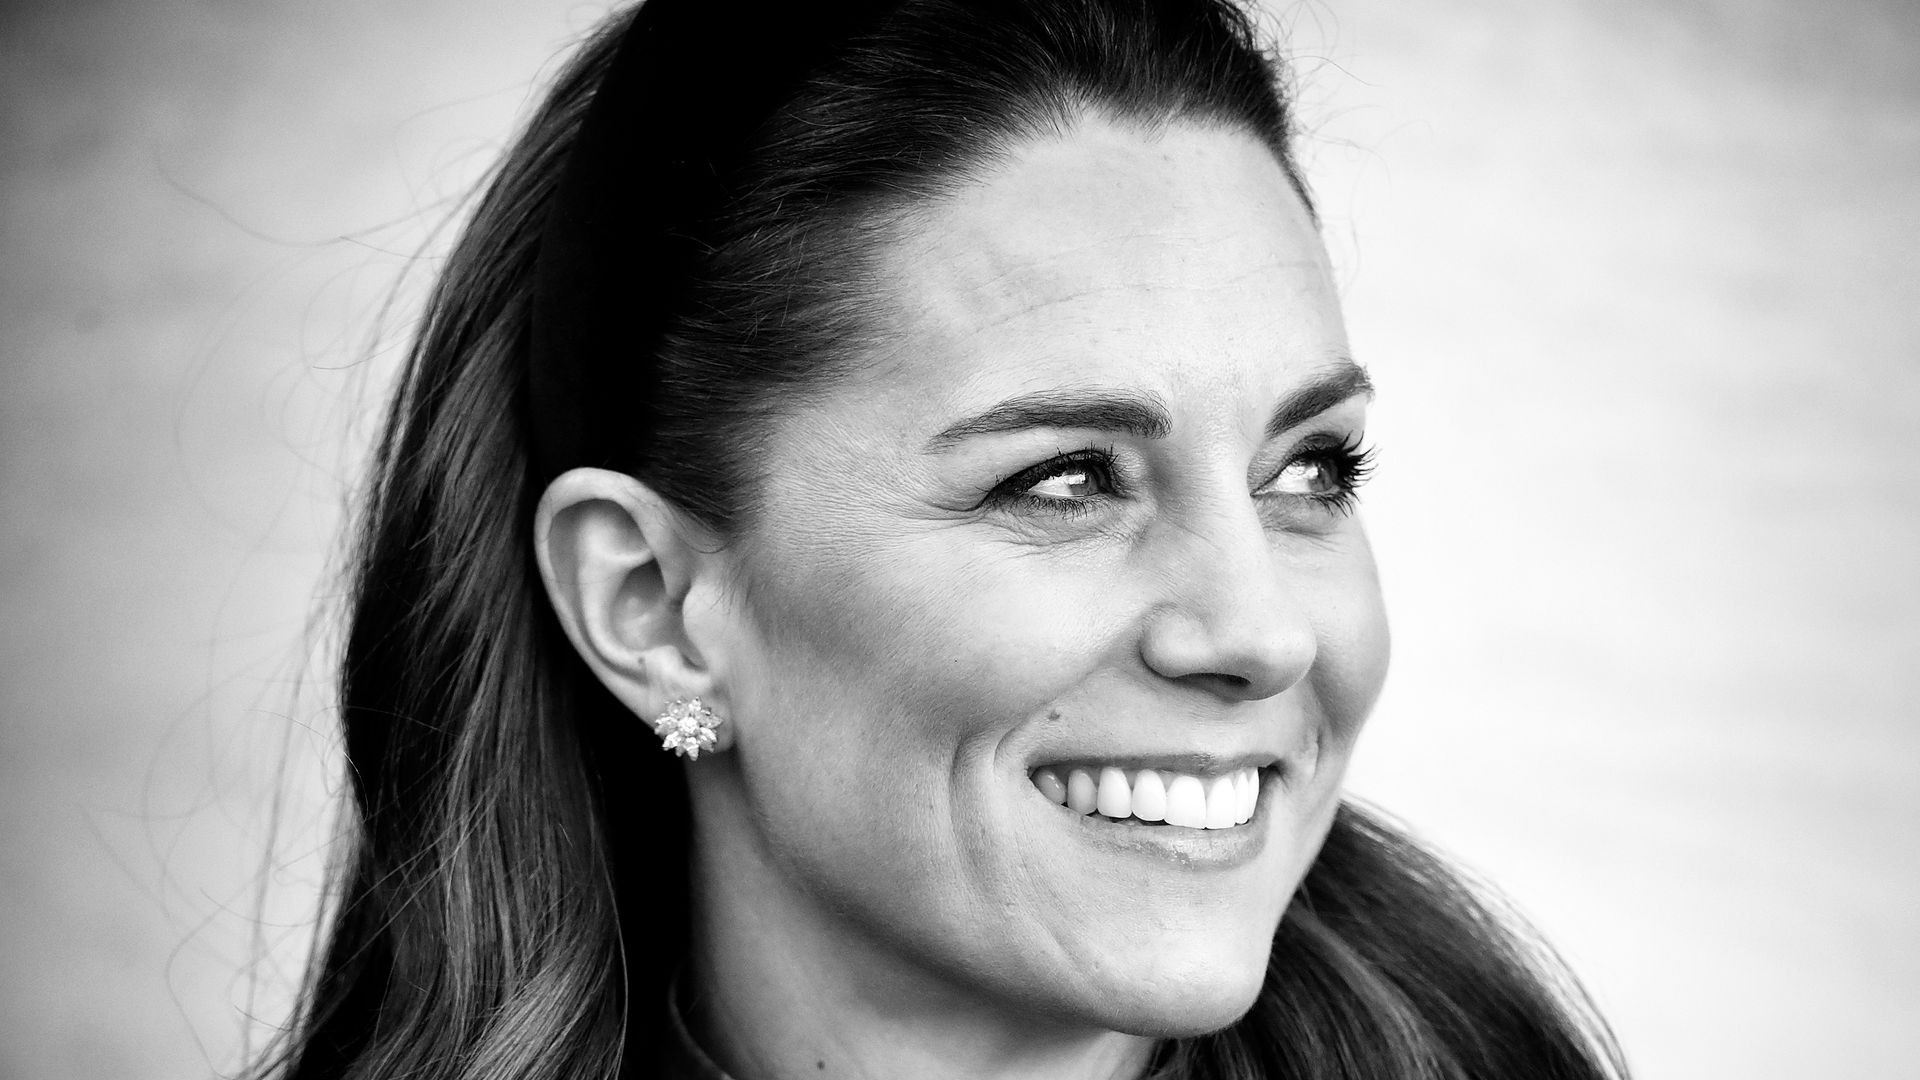 Kate Middleton portrait in black and white from 2020 visit to Dublin